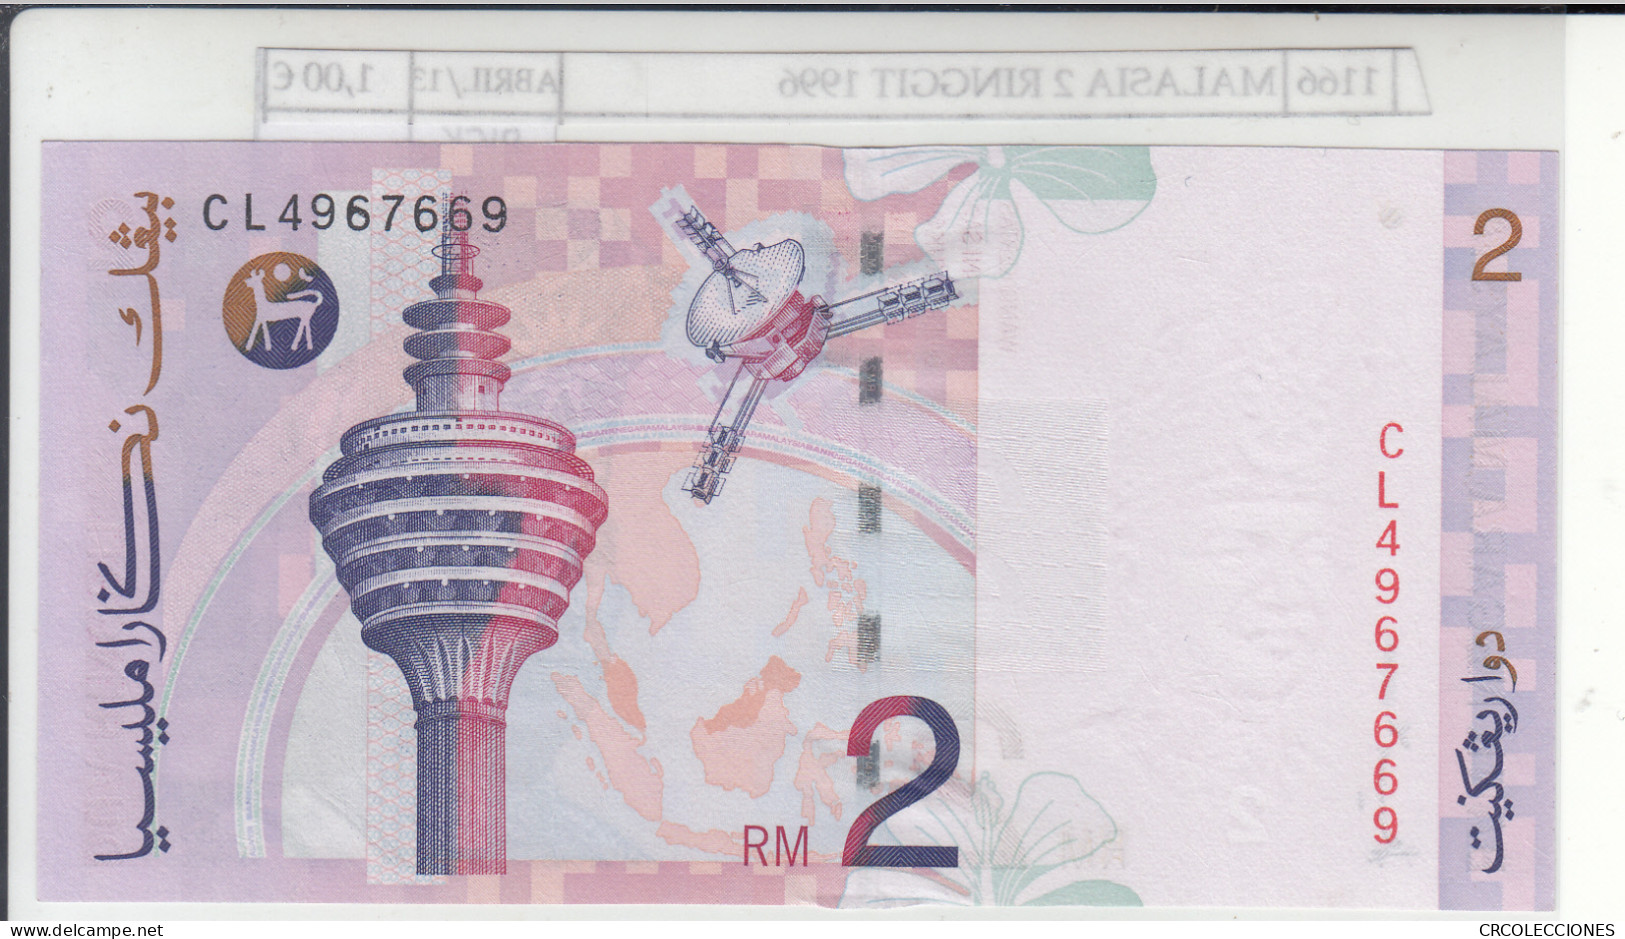 BILLETE MALASIA 2 RINGGIT 1996 P-40a  - Other - Asia